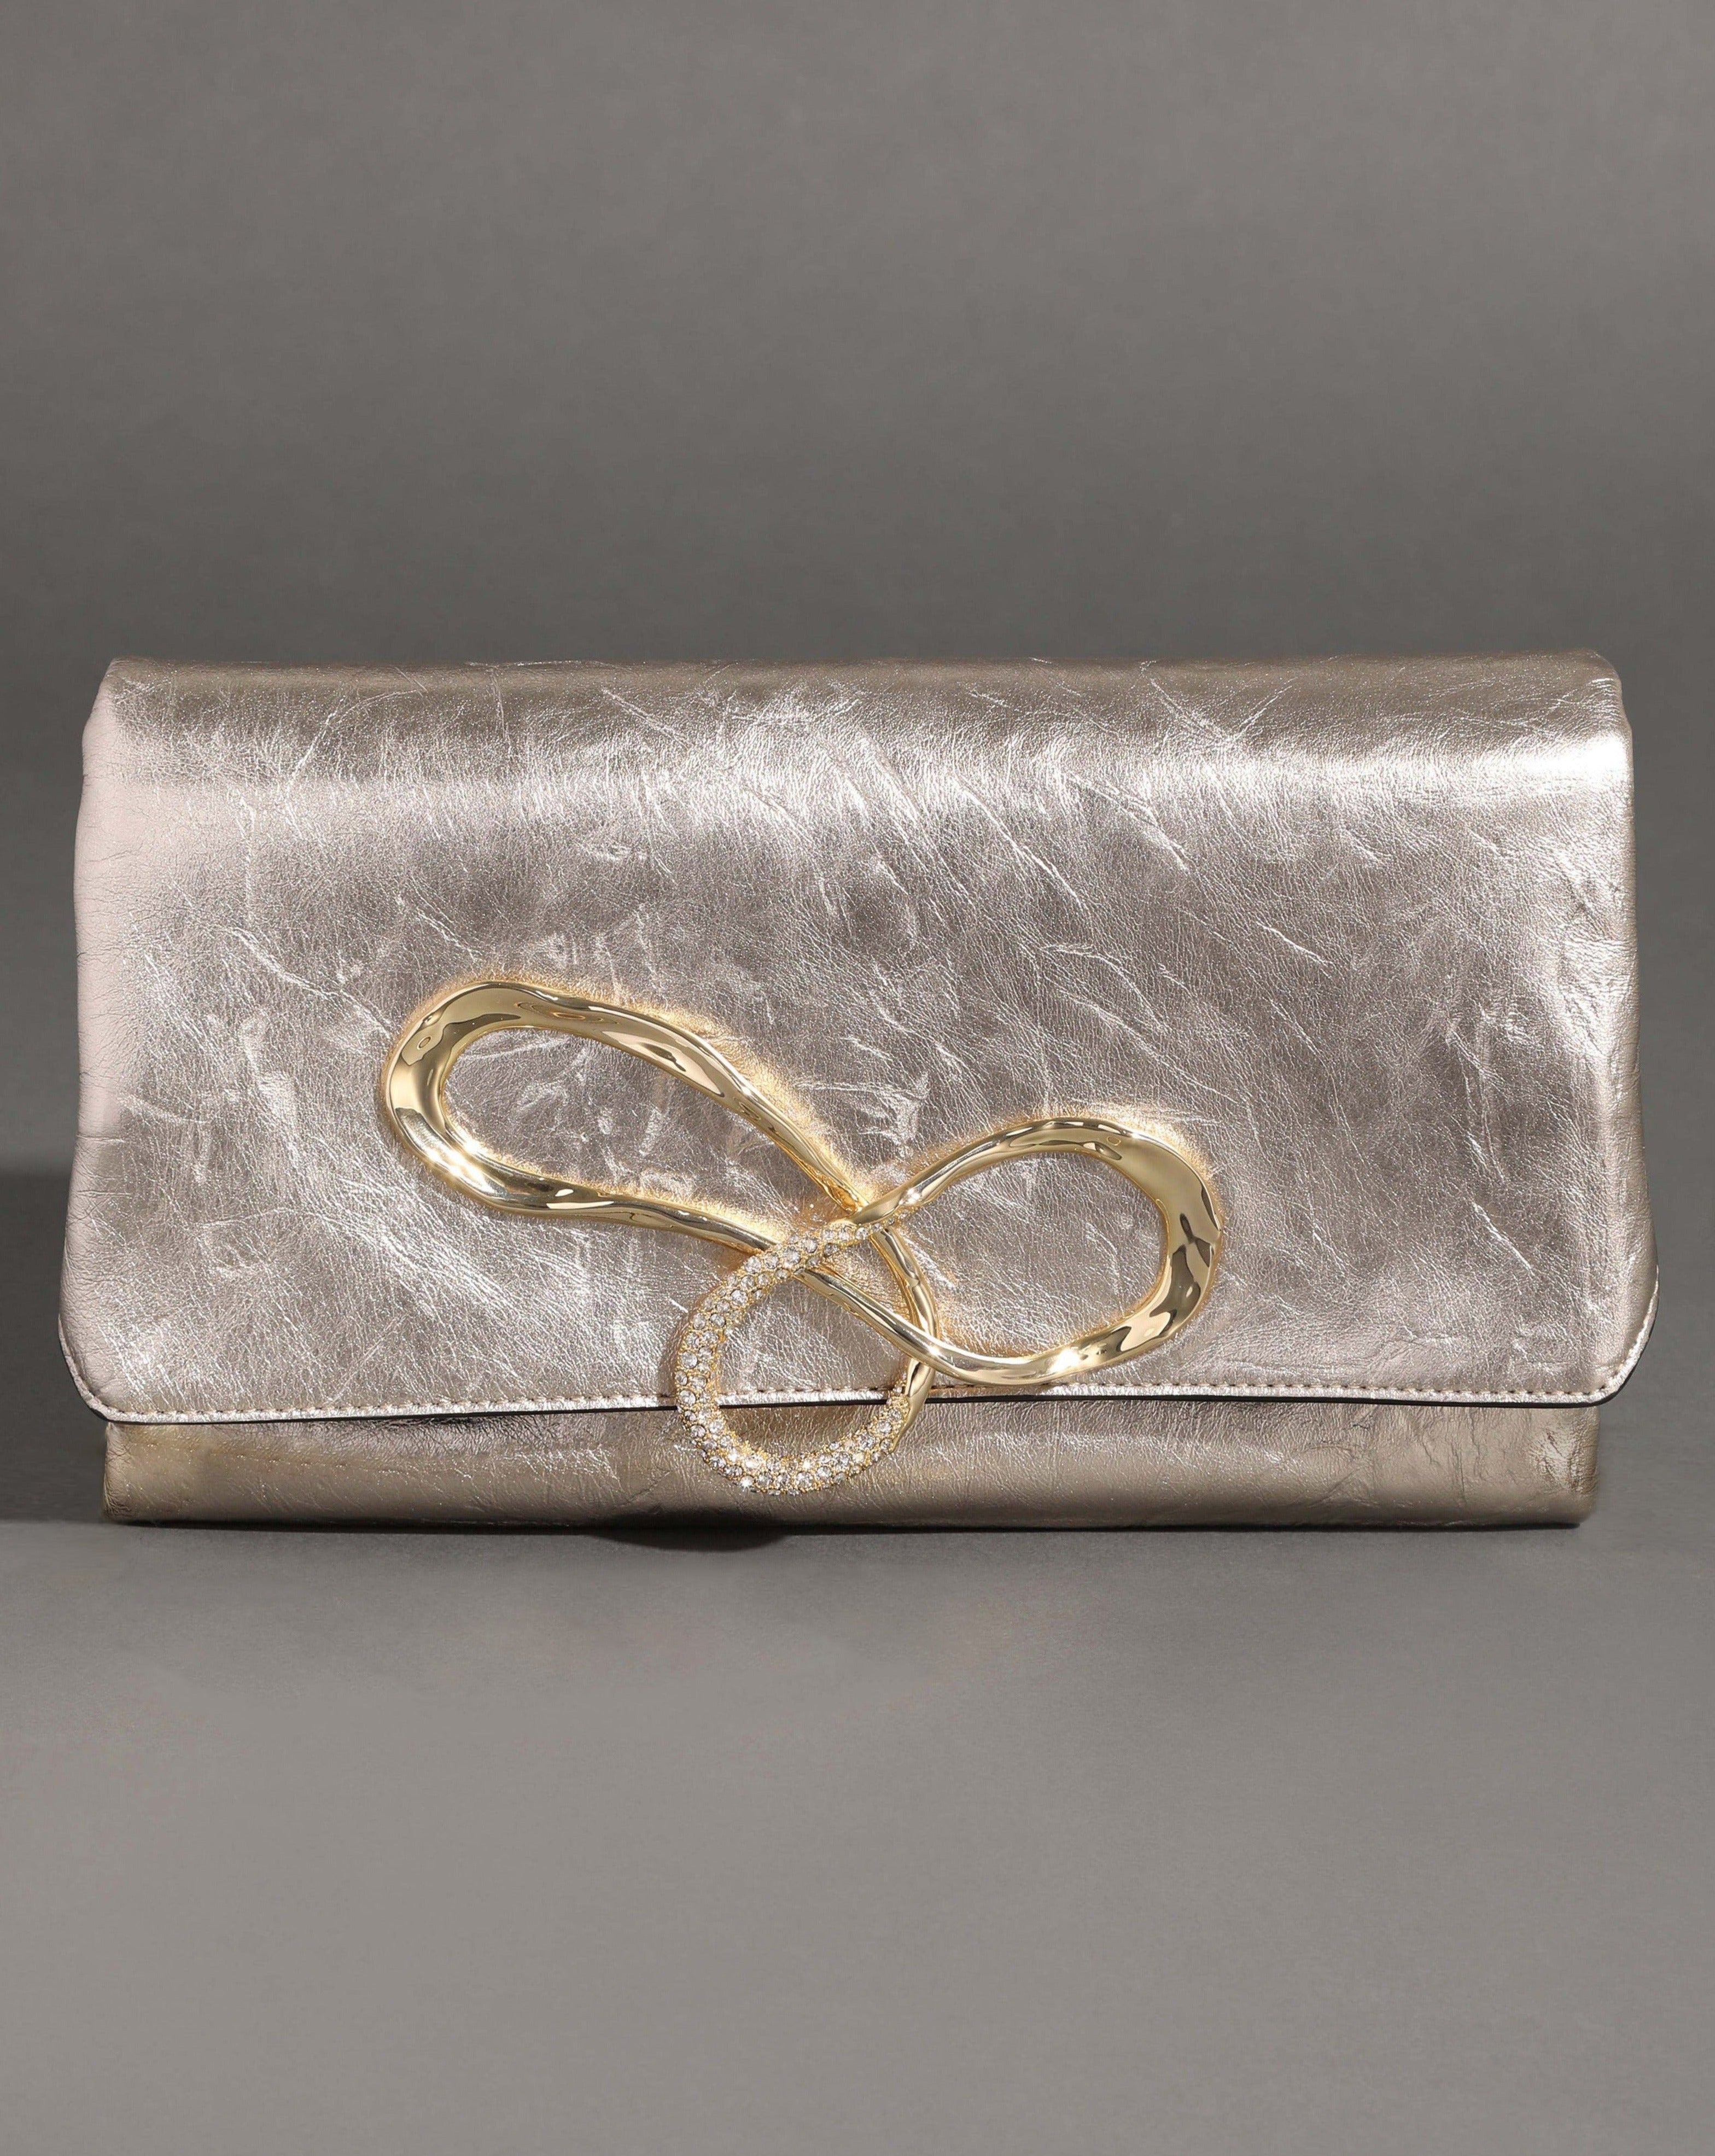 Alexis Bittar Soft Metallic Leather Clutch in Champagne